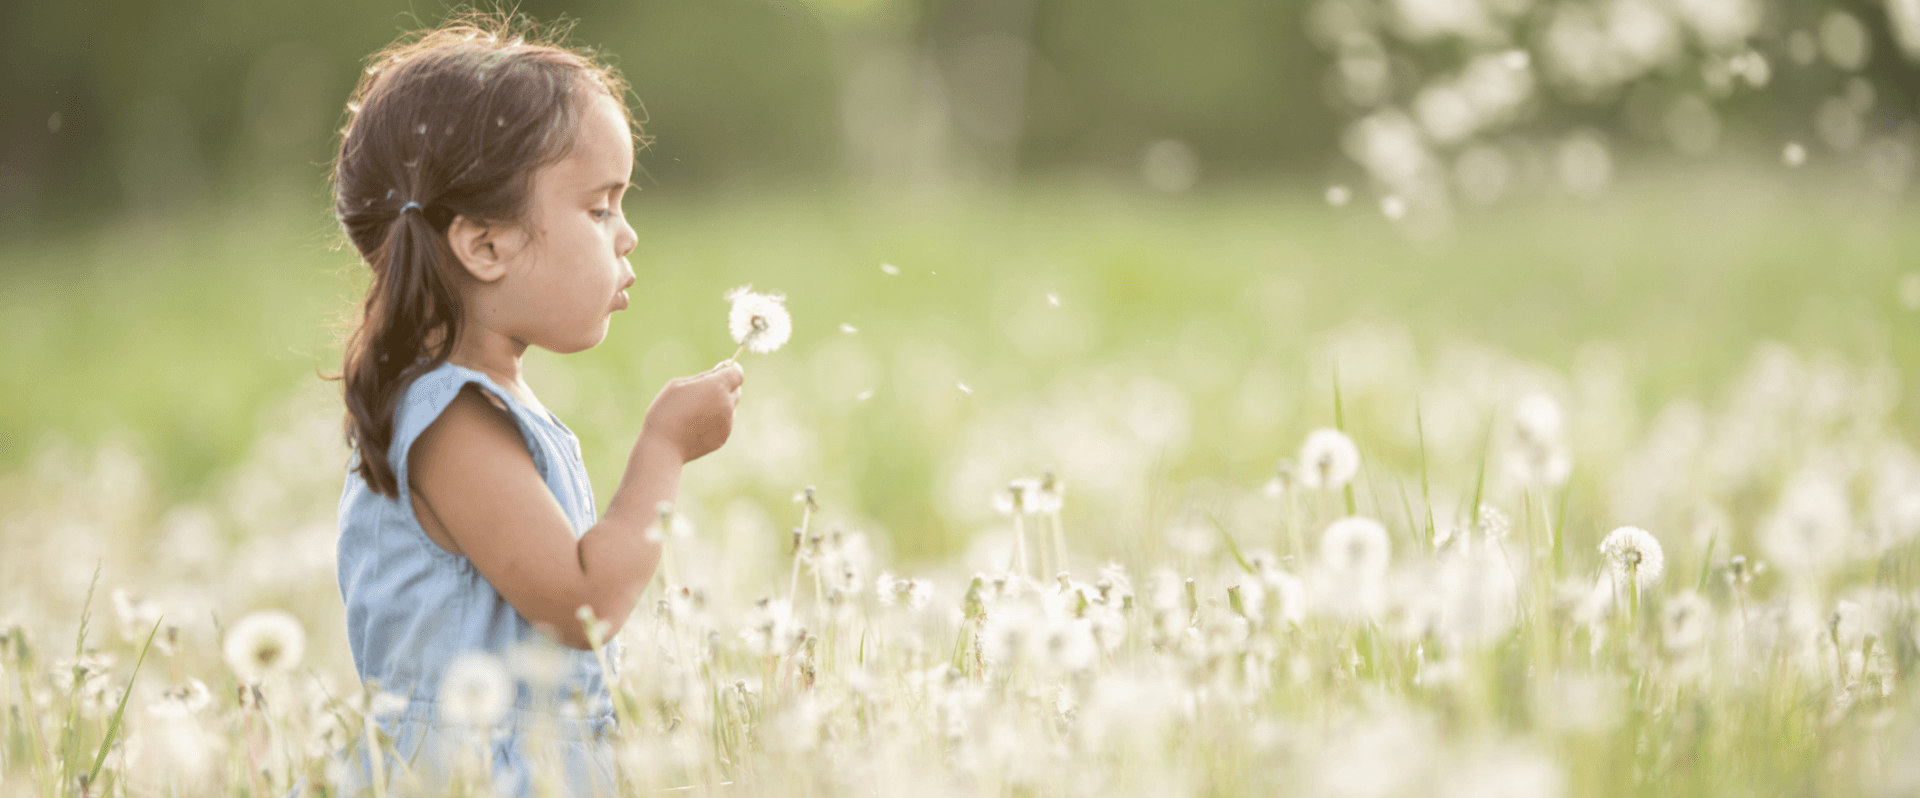 Photograph of young girl with dandelion